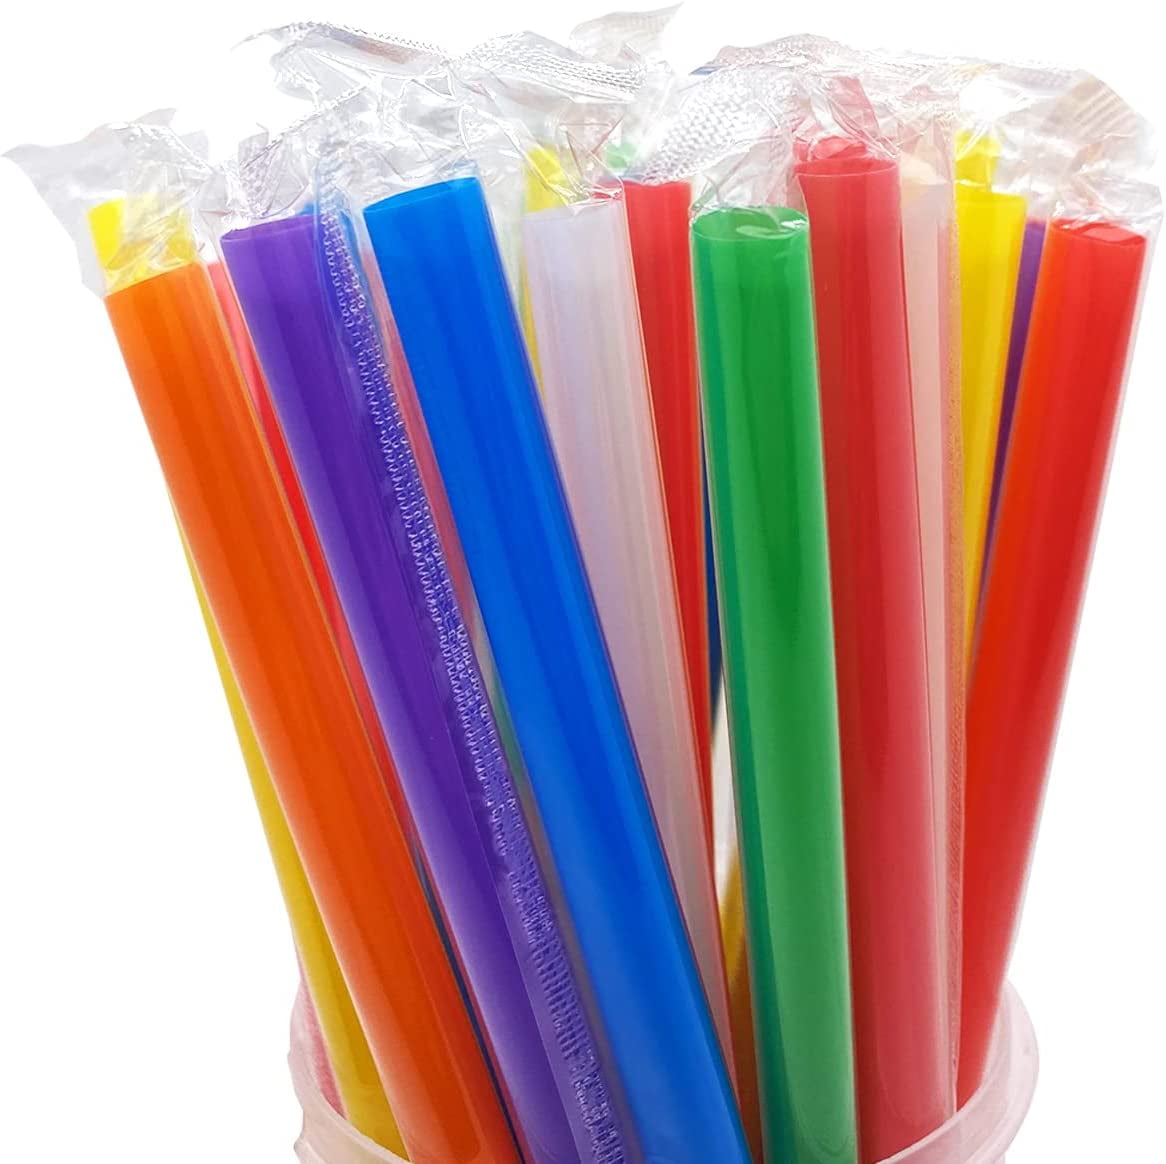 100 pcs 7.5 Clear individually wrapped Bubble Boba tea fat Straws  Smoothies Jumbo Thick holiday event party Drinking PP straws $6…